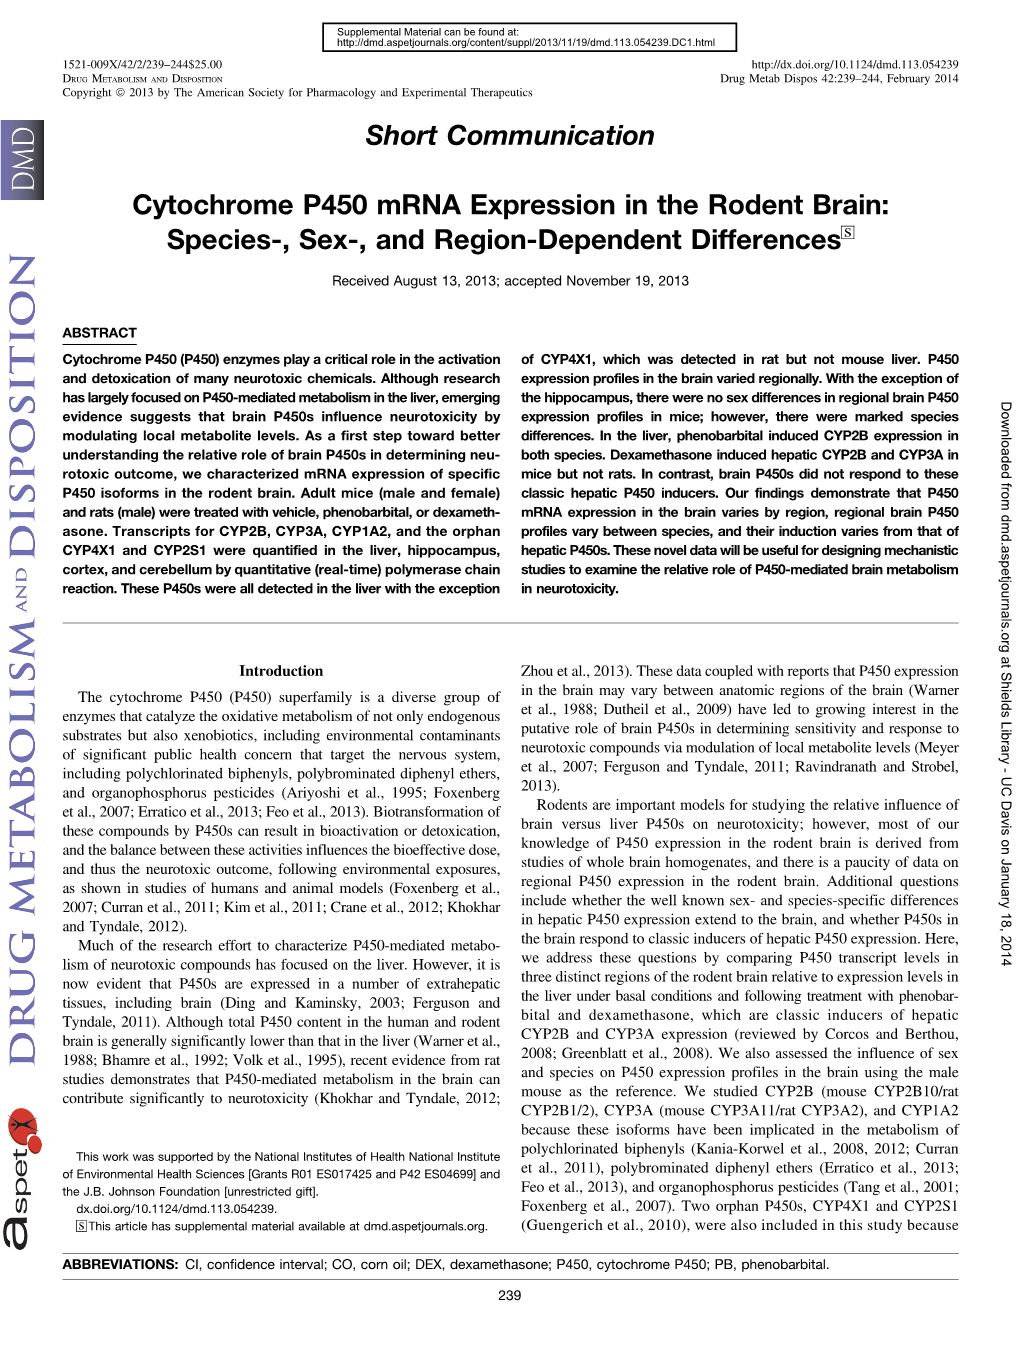 Short Communication Cytochrome P450 Mrna Expression in the Rodent Brain